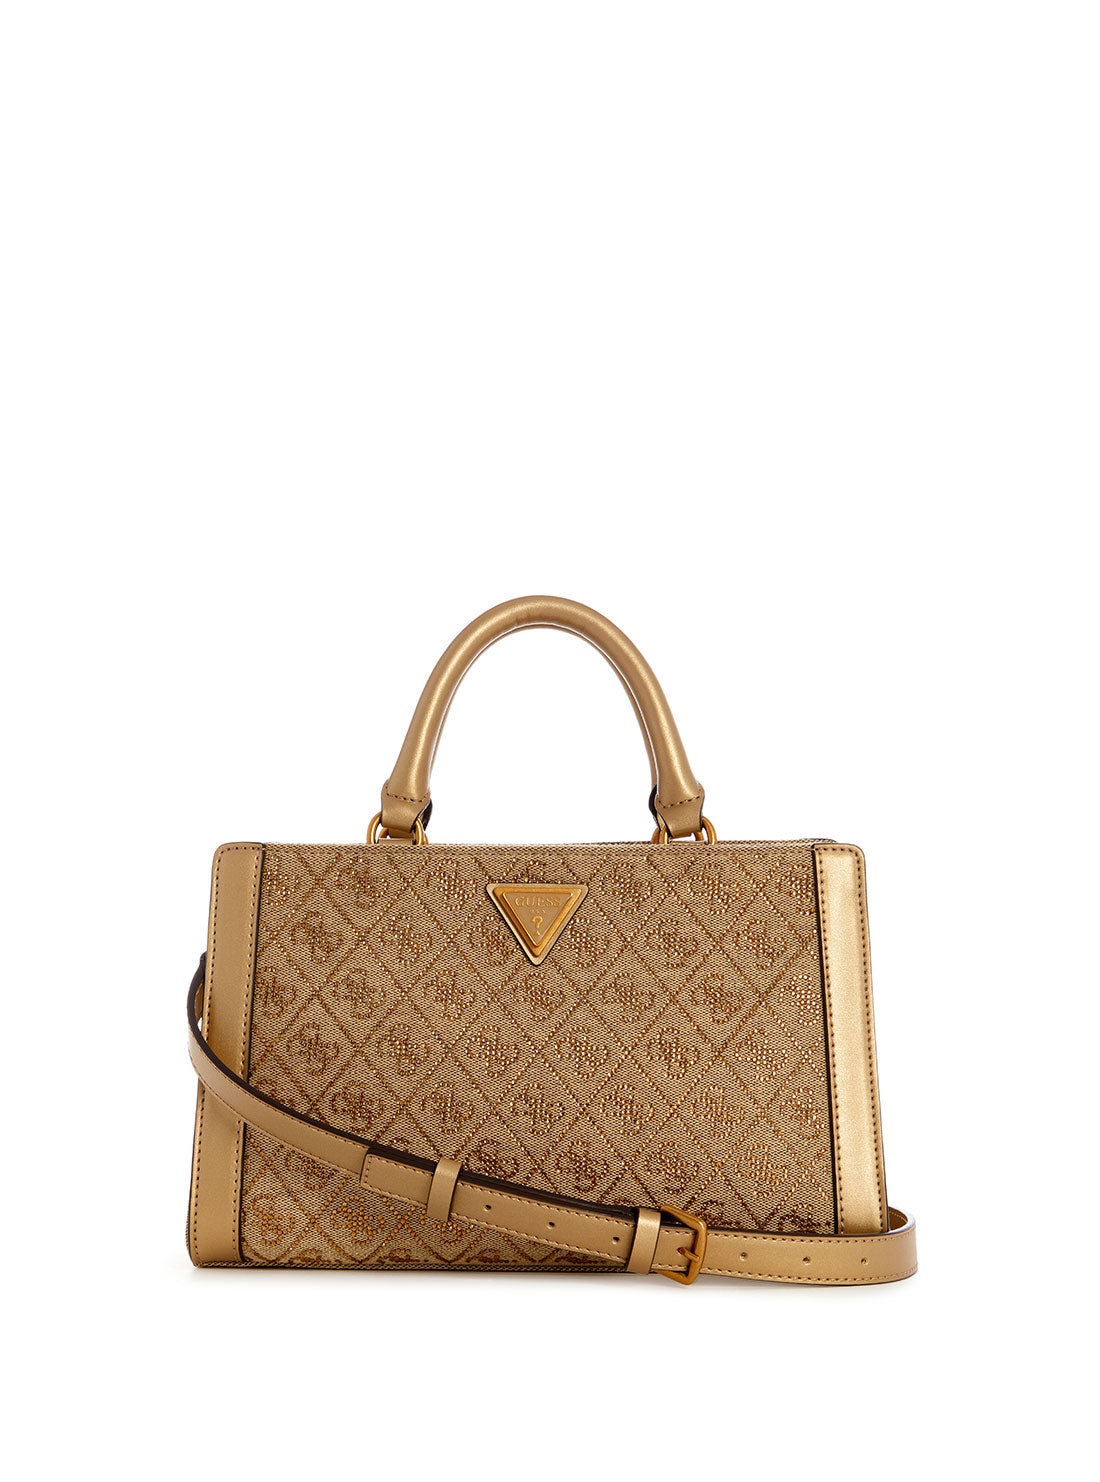 GUESS Gold Logo Small Satchel Bag front view